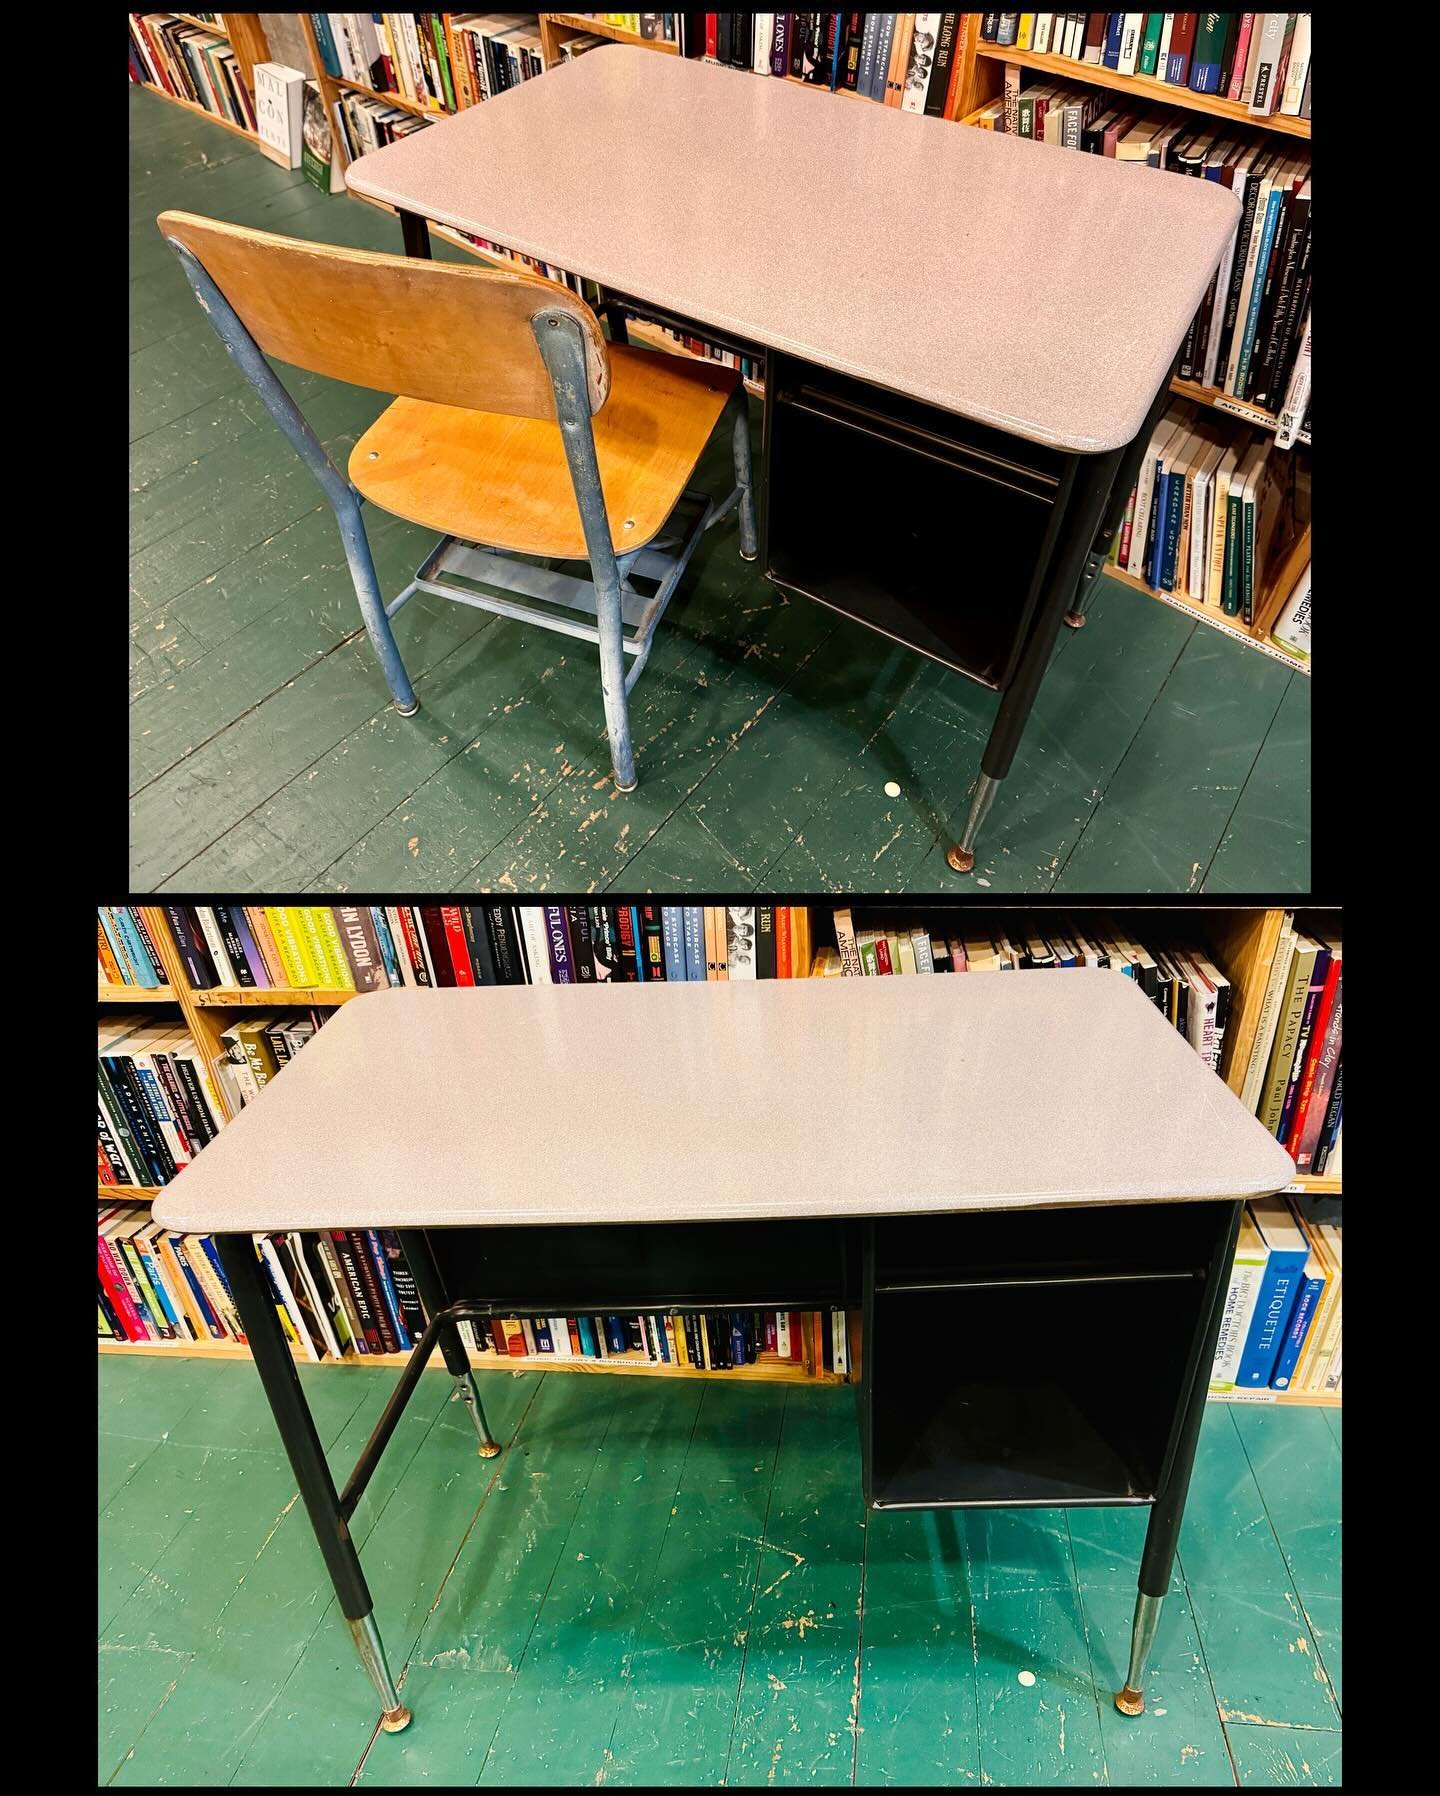 Small (34&rdquo; x 20&rdquo;) metal desk with lower storage. Height is adjustable. Fantastic for home detention. $35
#desk #fatrabbitky